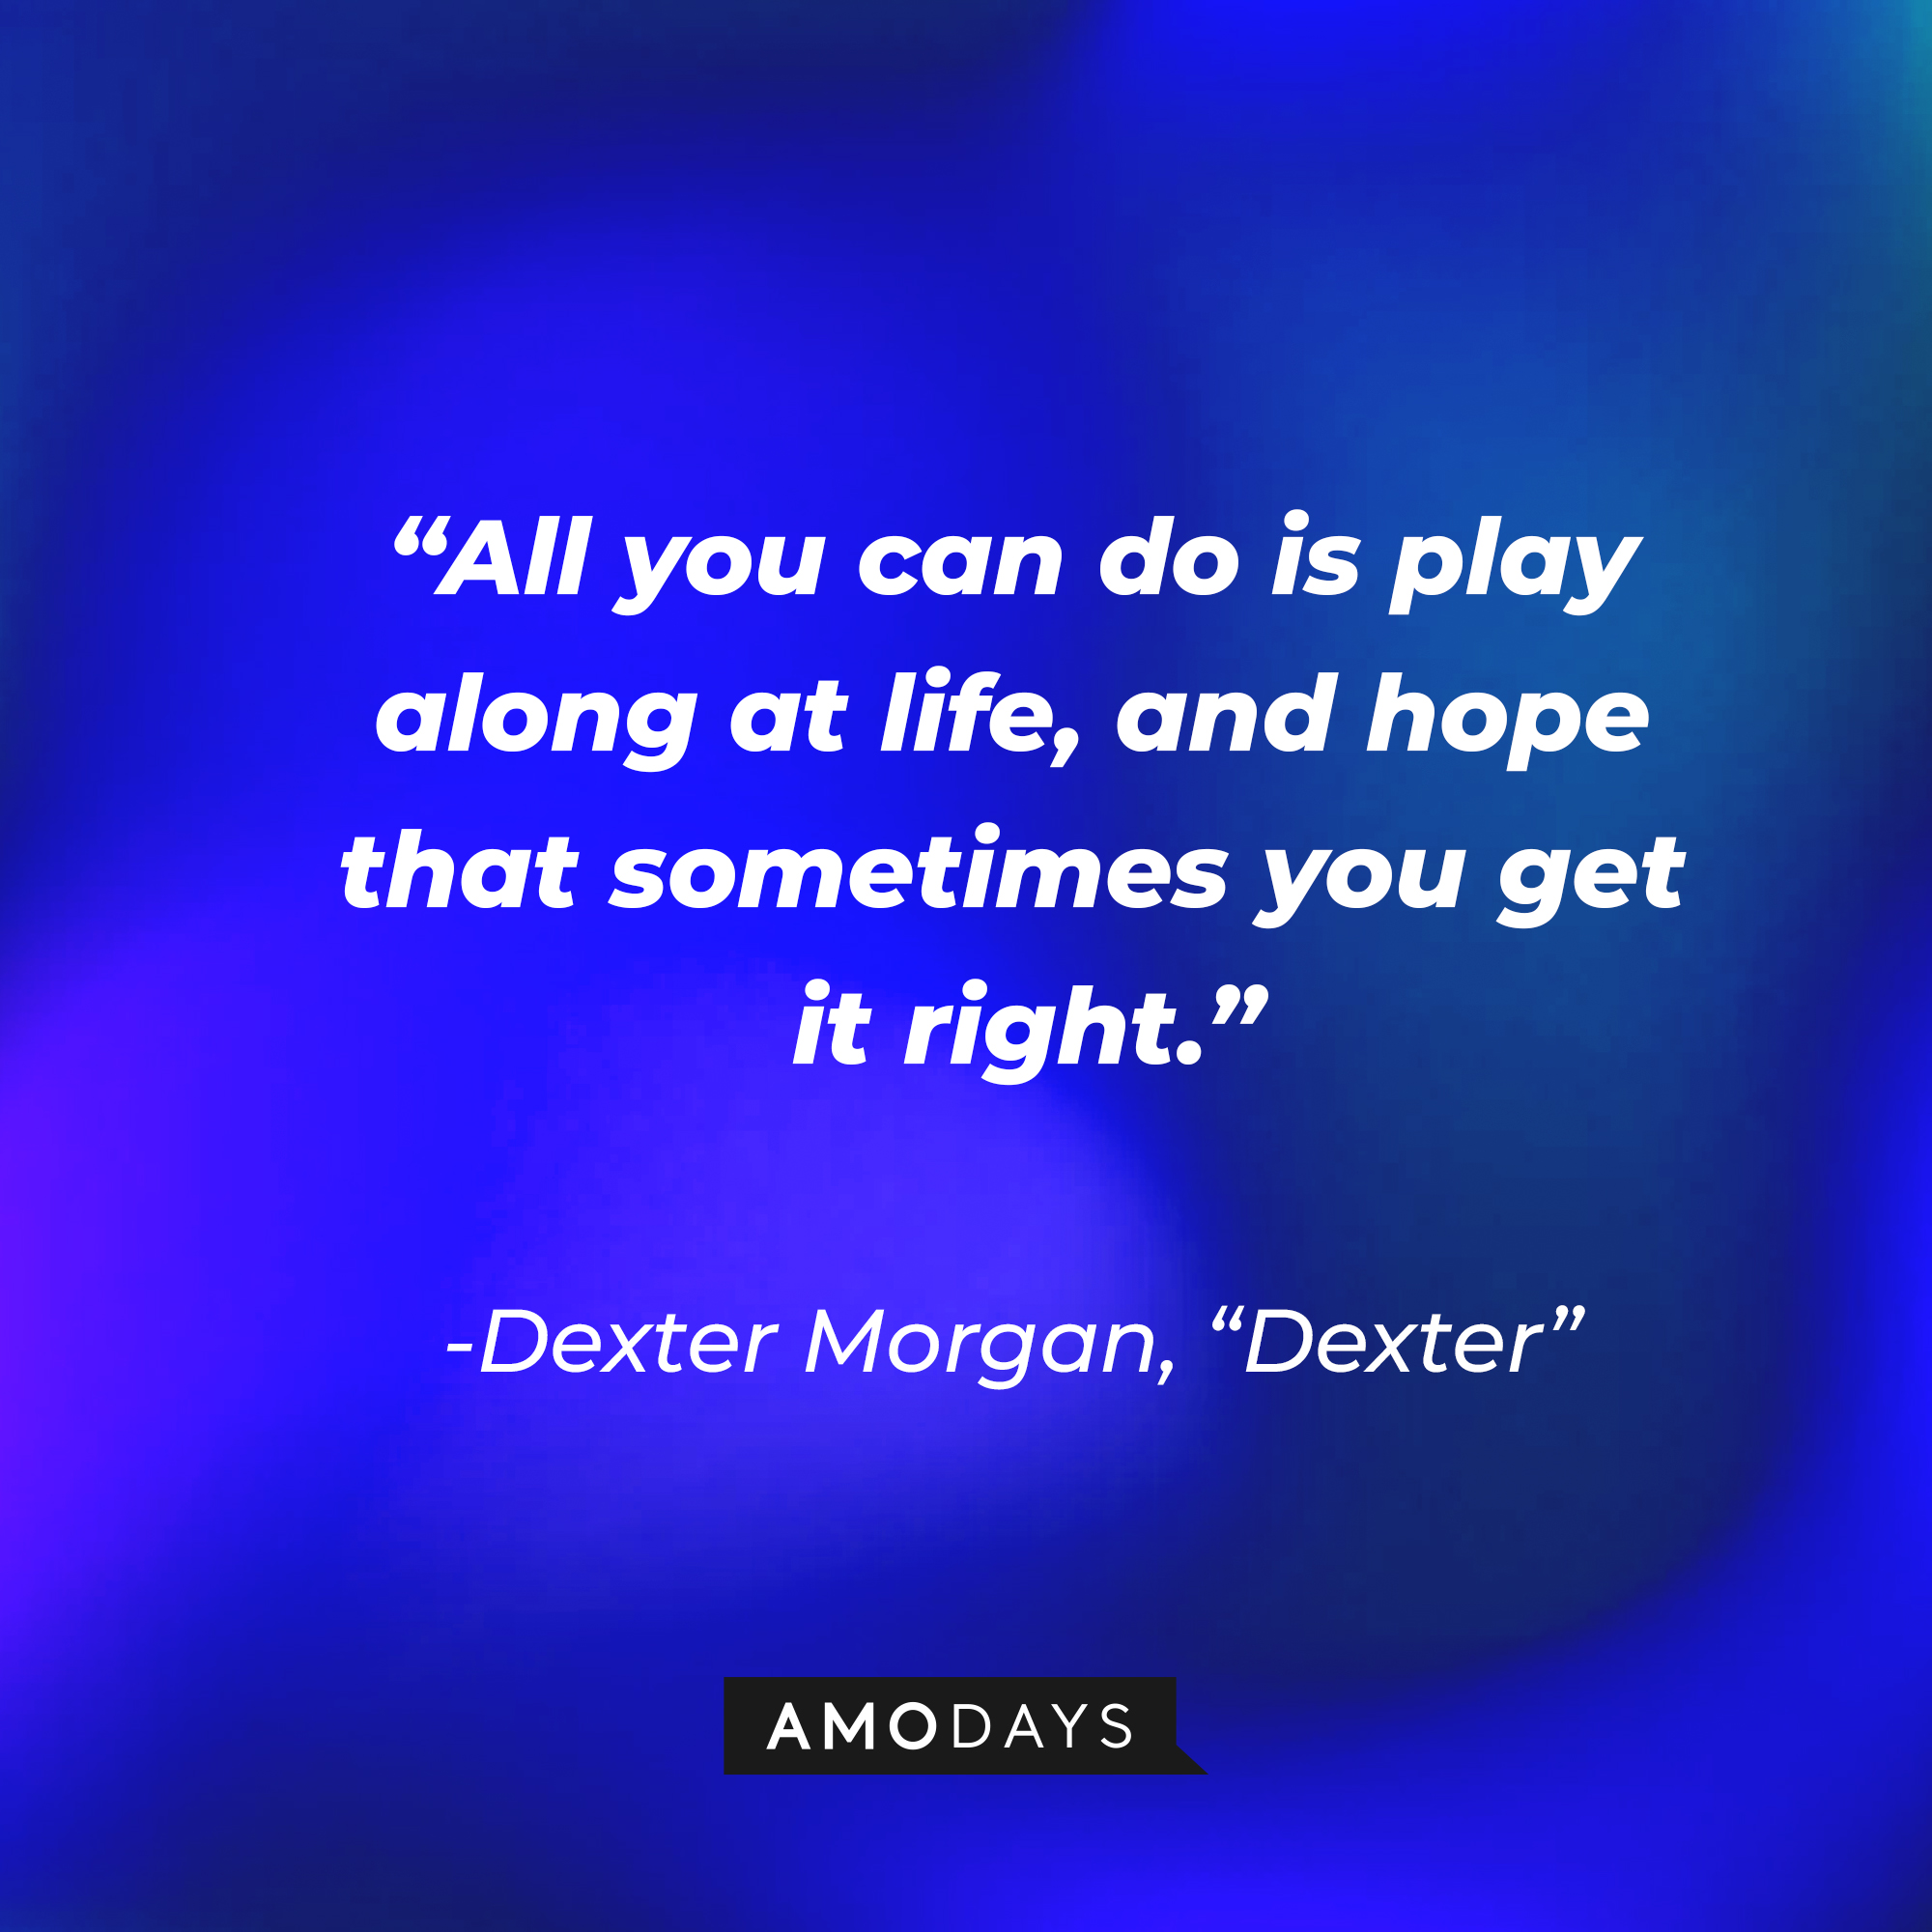 Dexter Morgan's quote from "Dexter:" “All you can do is play along at life, and hope that sometimes you get it right.” | Source: AmoDays